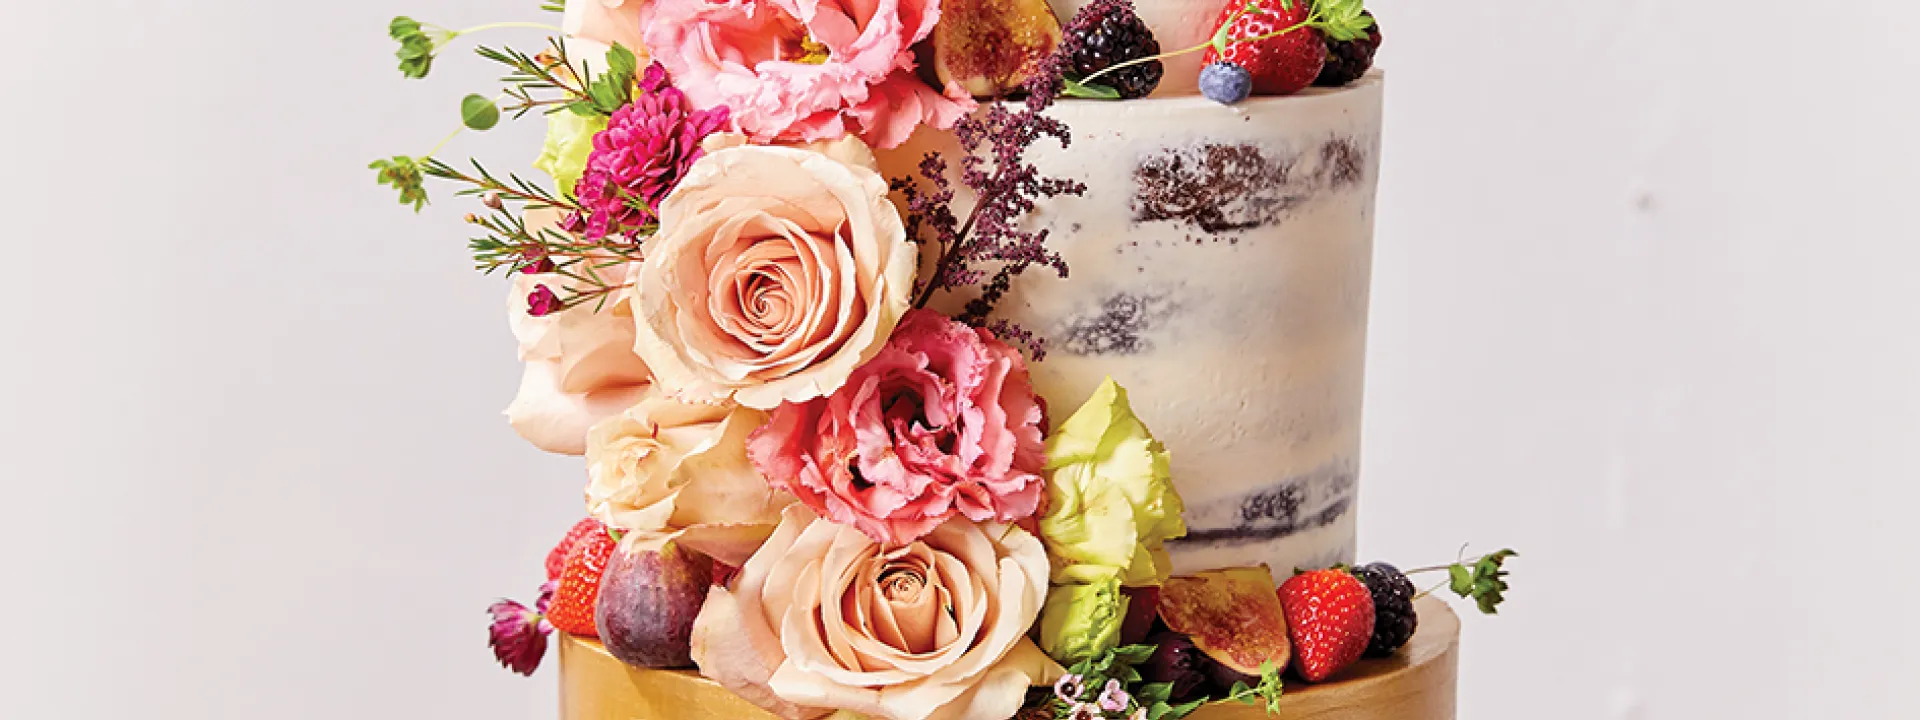 Just a Dash Cakes floral cake